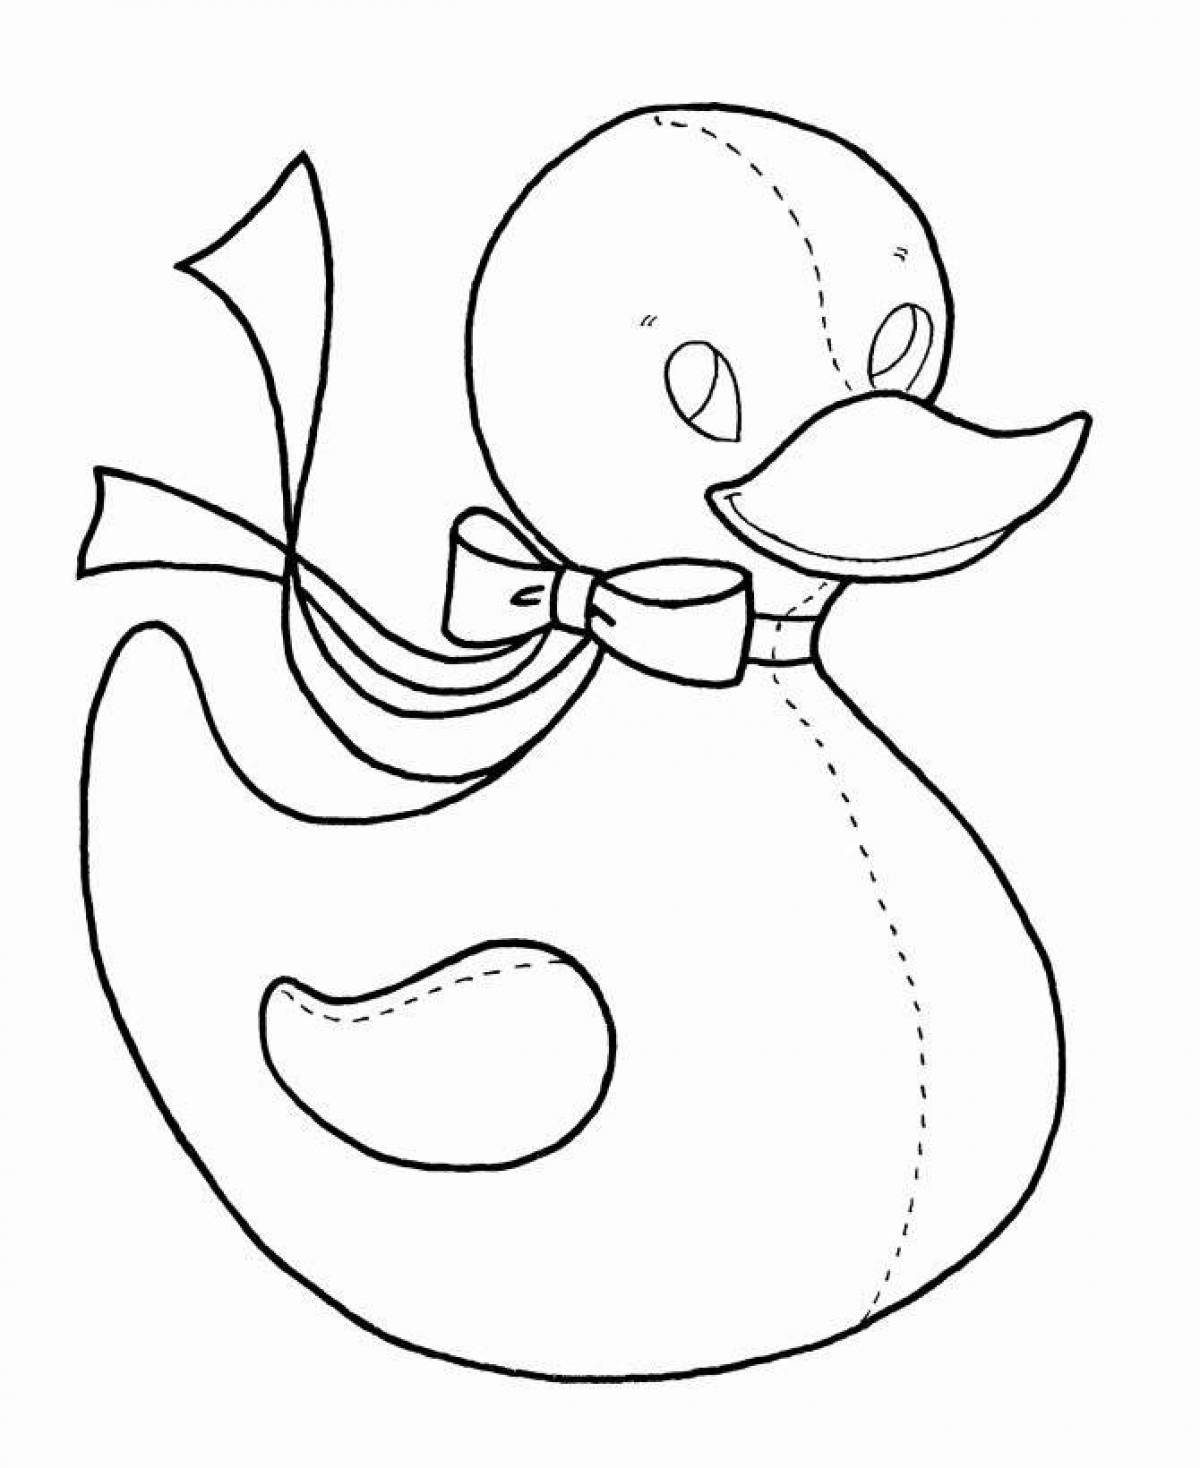 Coloring page gorgeous lalaphan duck